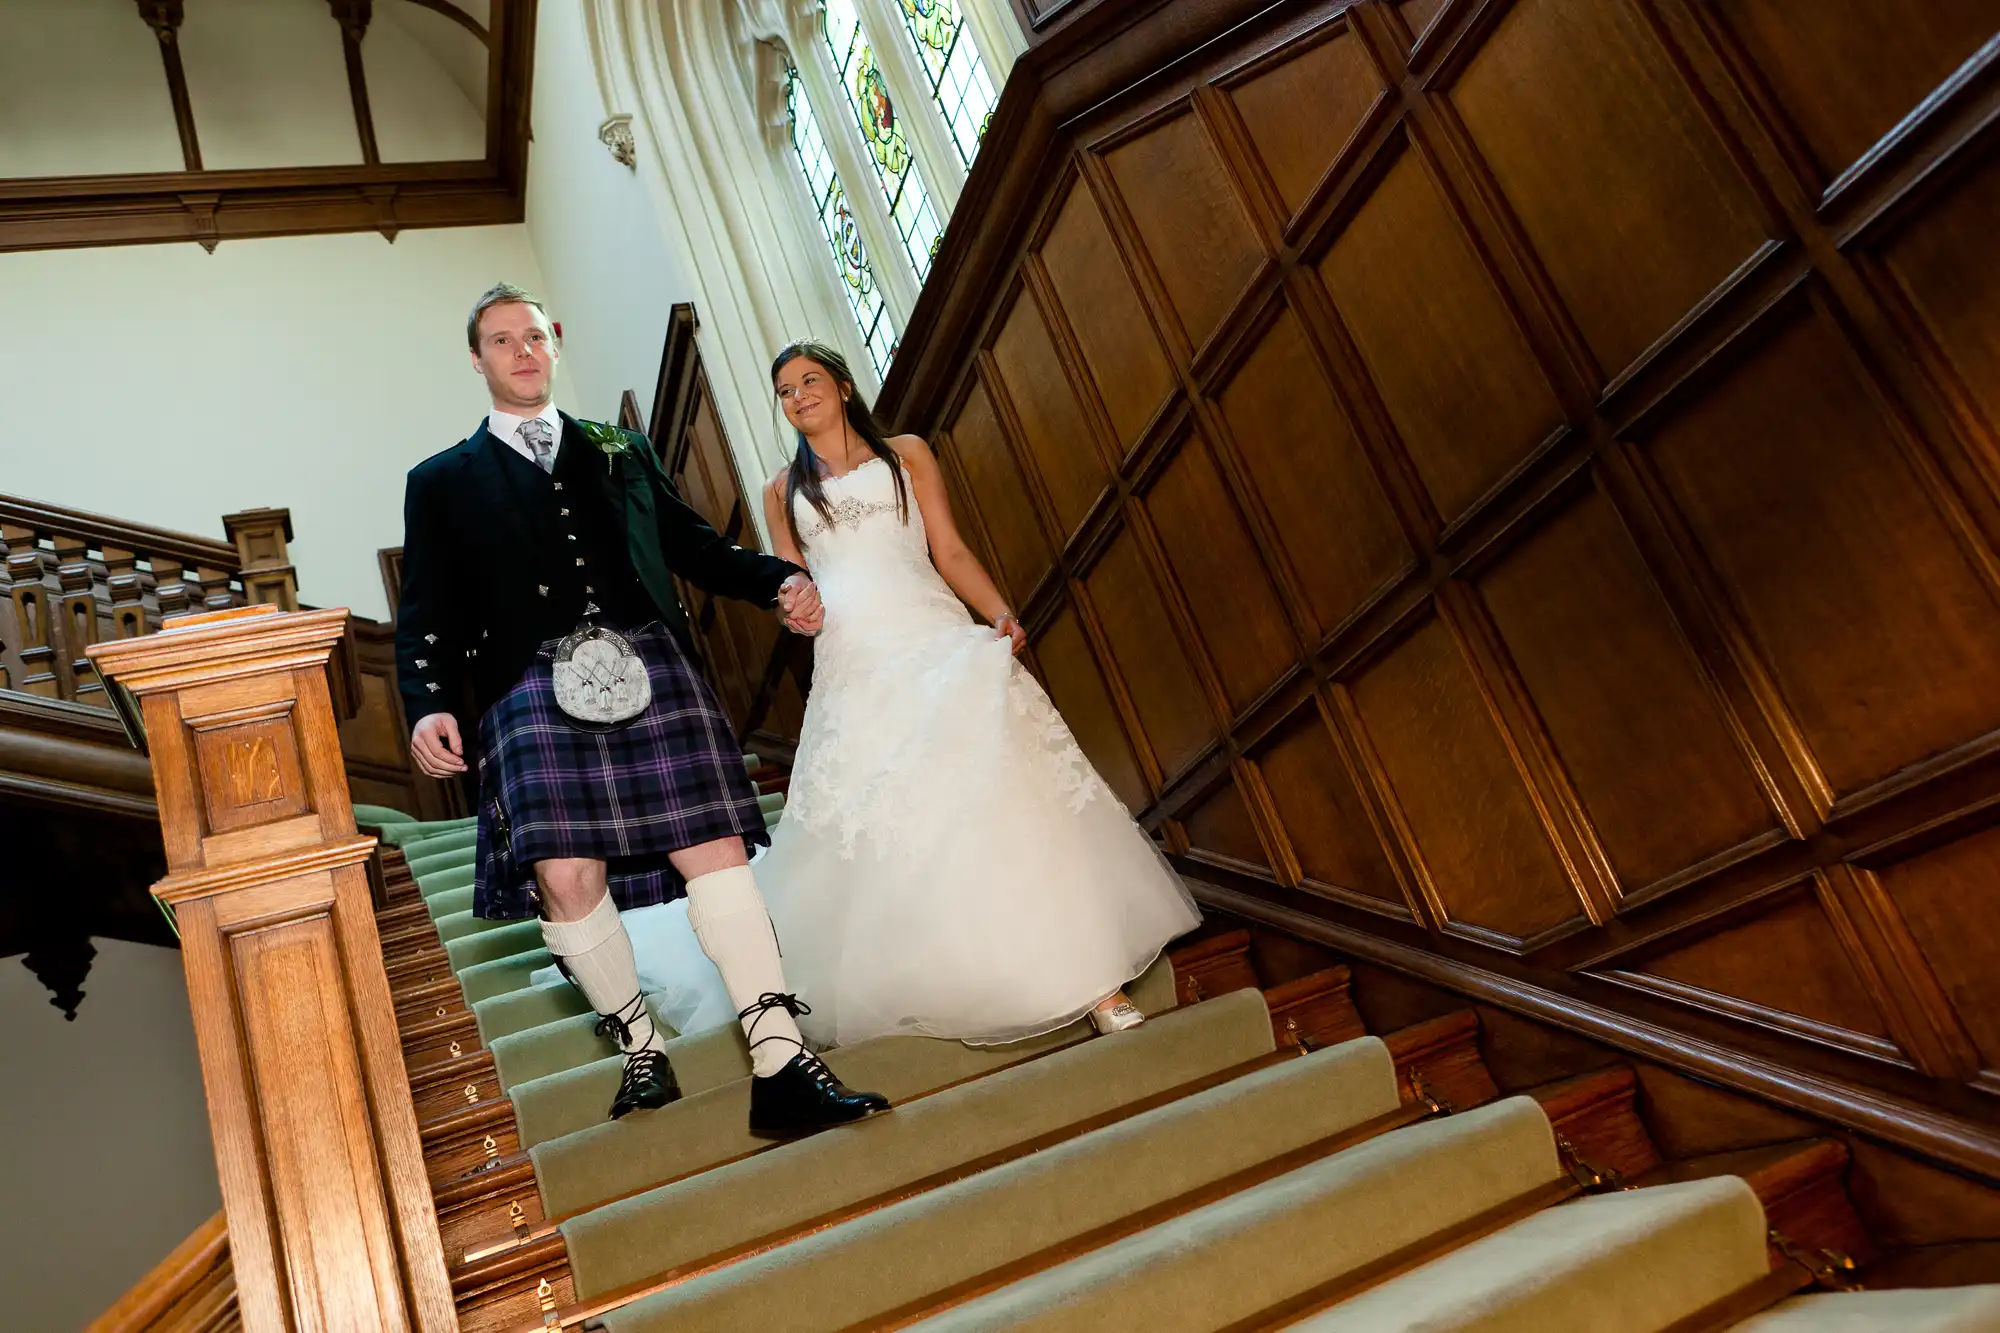 A bride in a white dress and a groom in a kilt holding hands while descending a staircase in a grand wood-paneled hall.